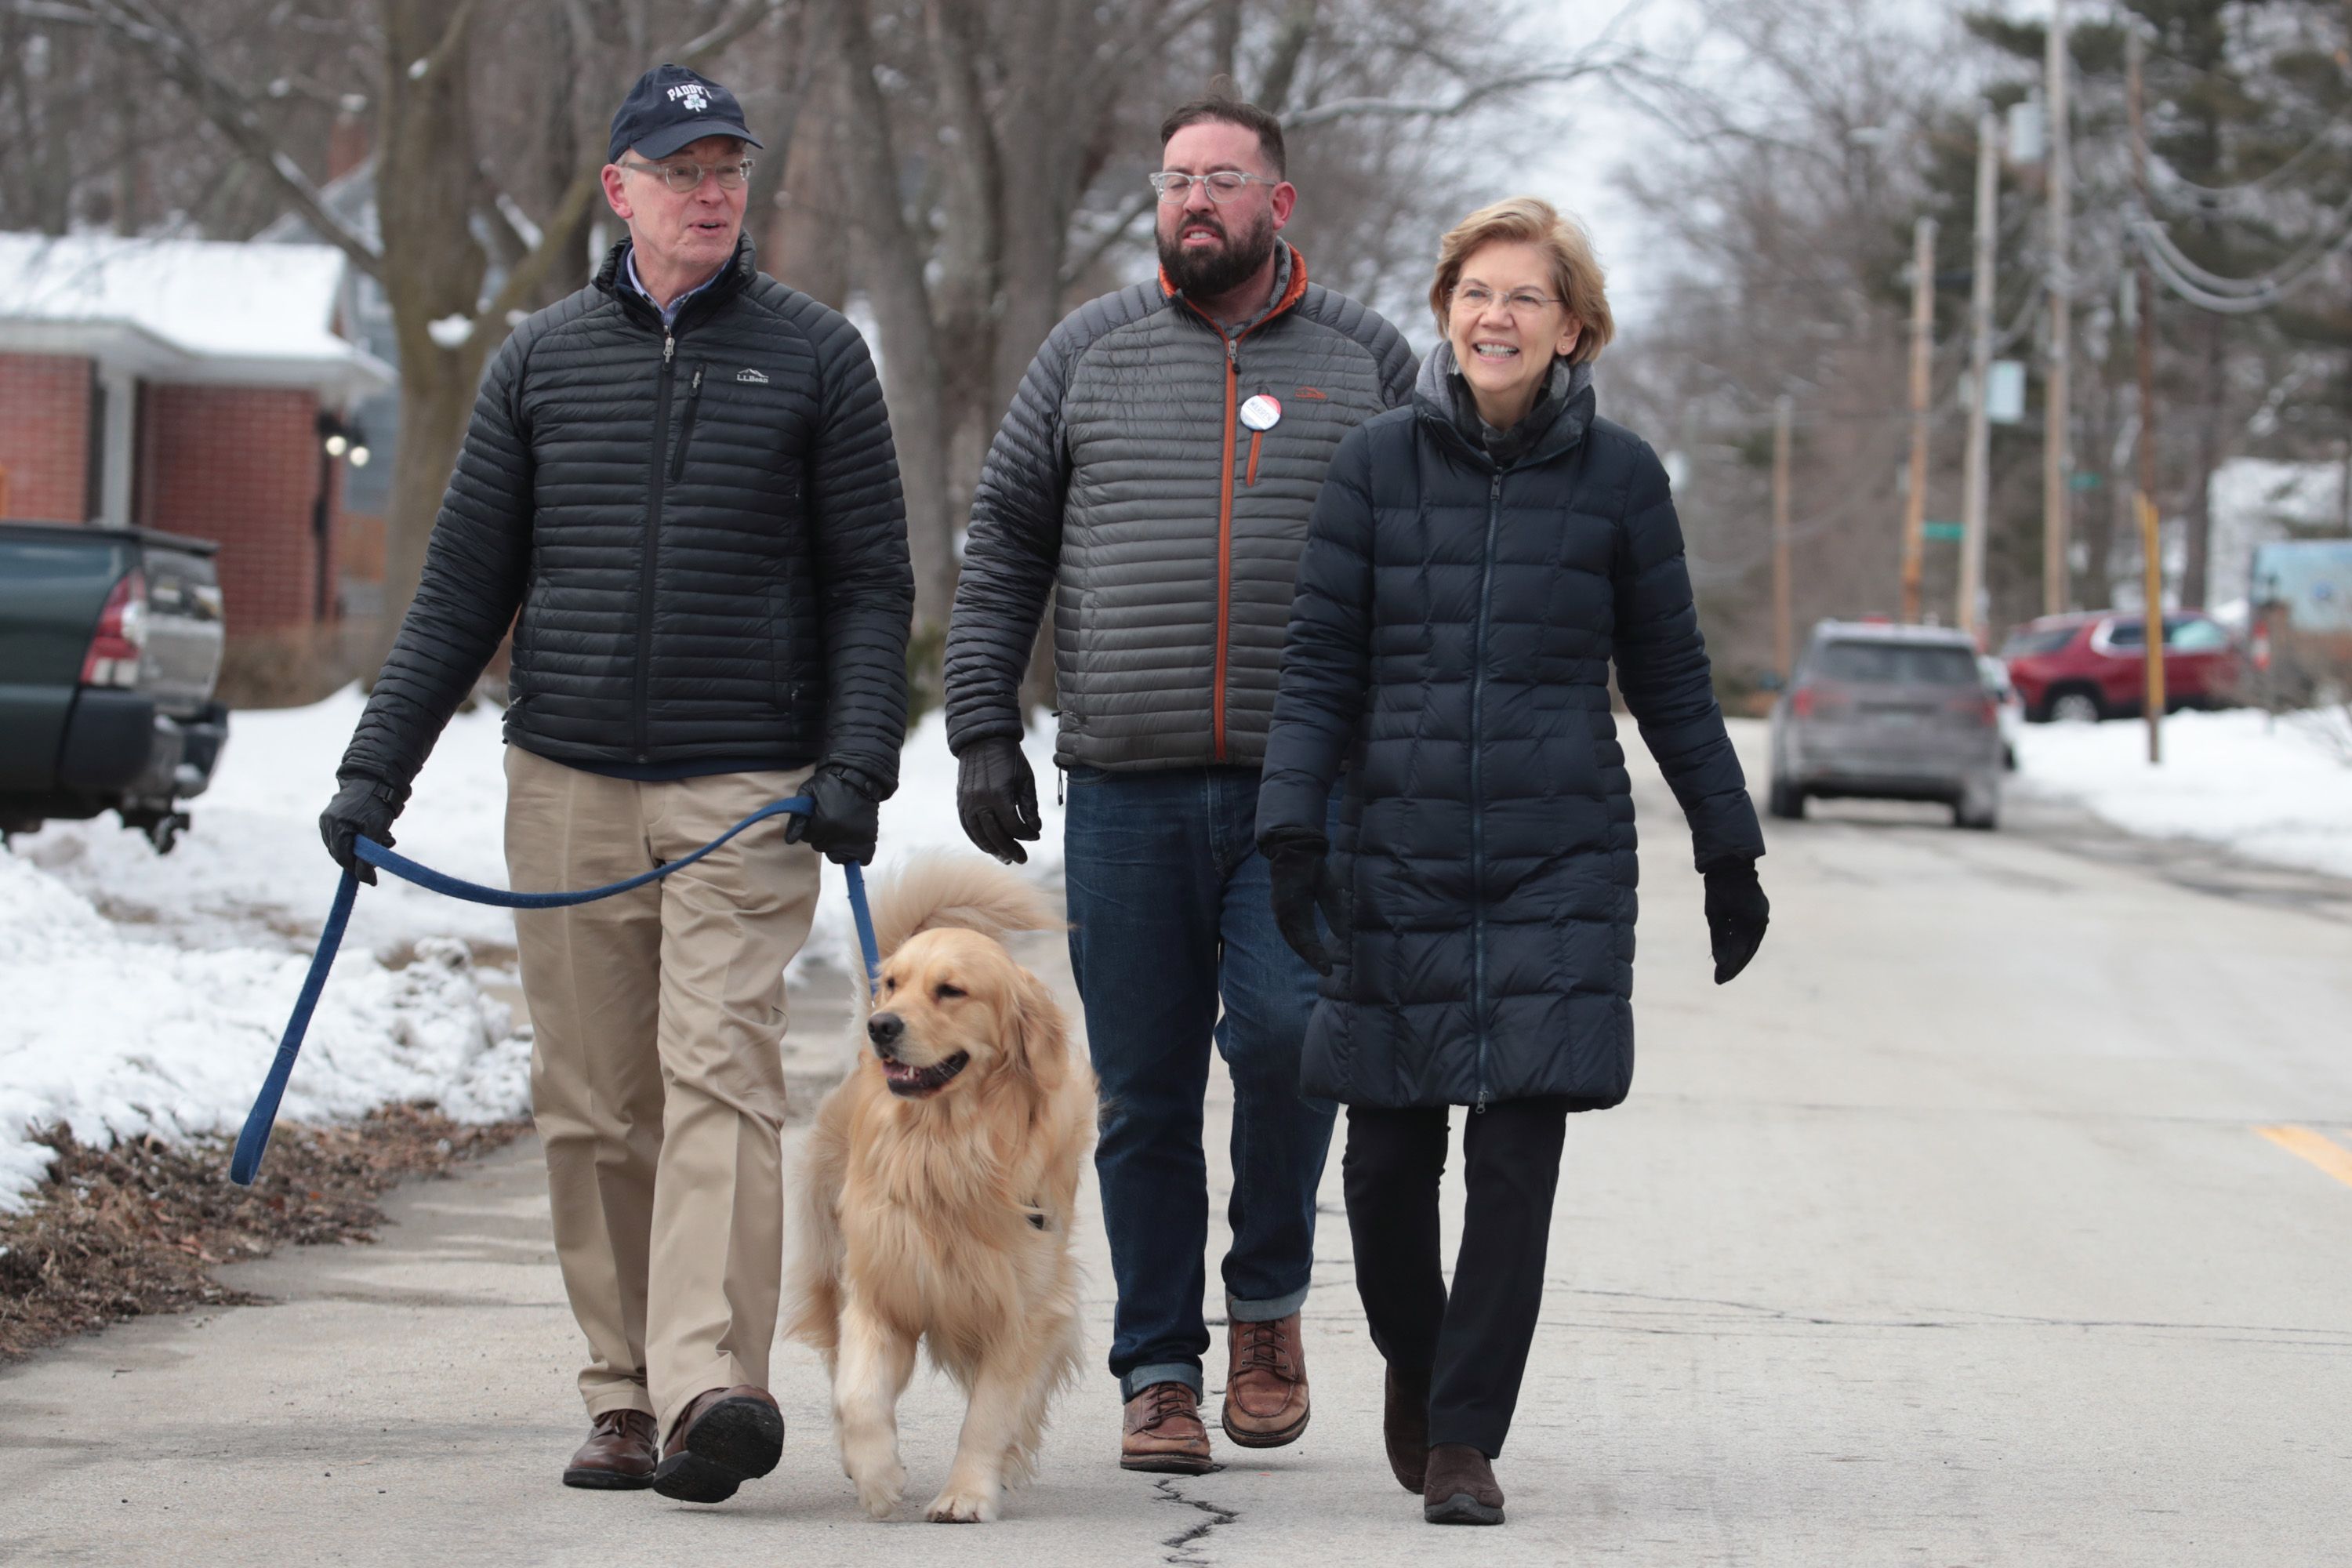 Democratic presidential candidate Sen. Elizabeth Warren (D-MA) canvases a neighborhood with her husband Bruce (L), her dog Bailey and campaign volunteer Colin Pio on February 08